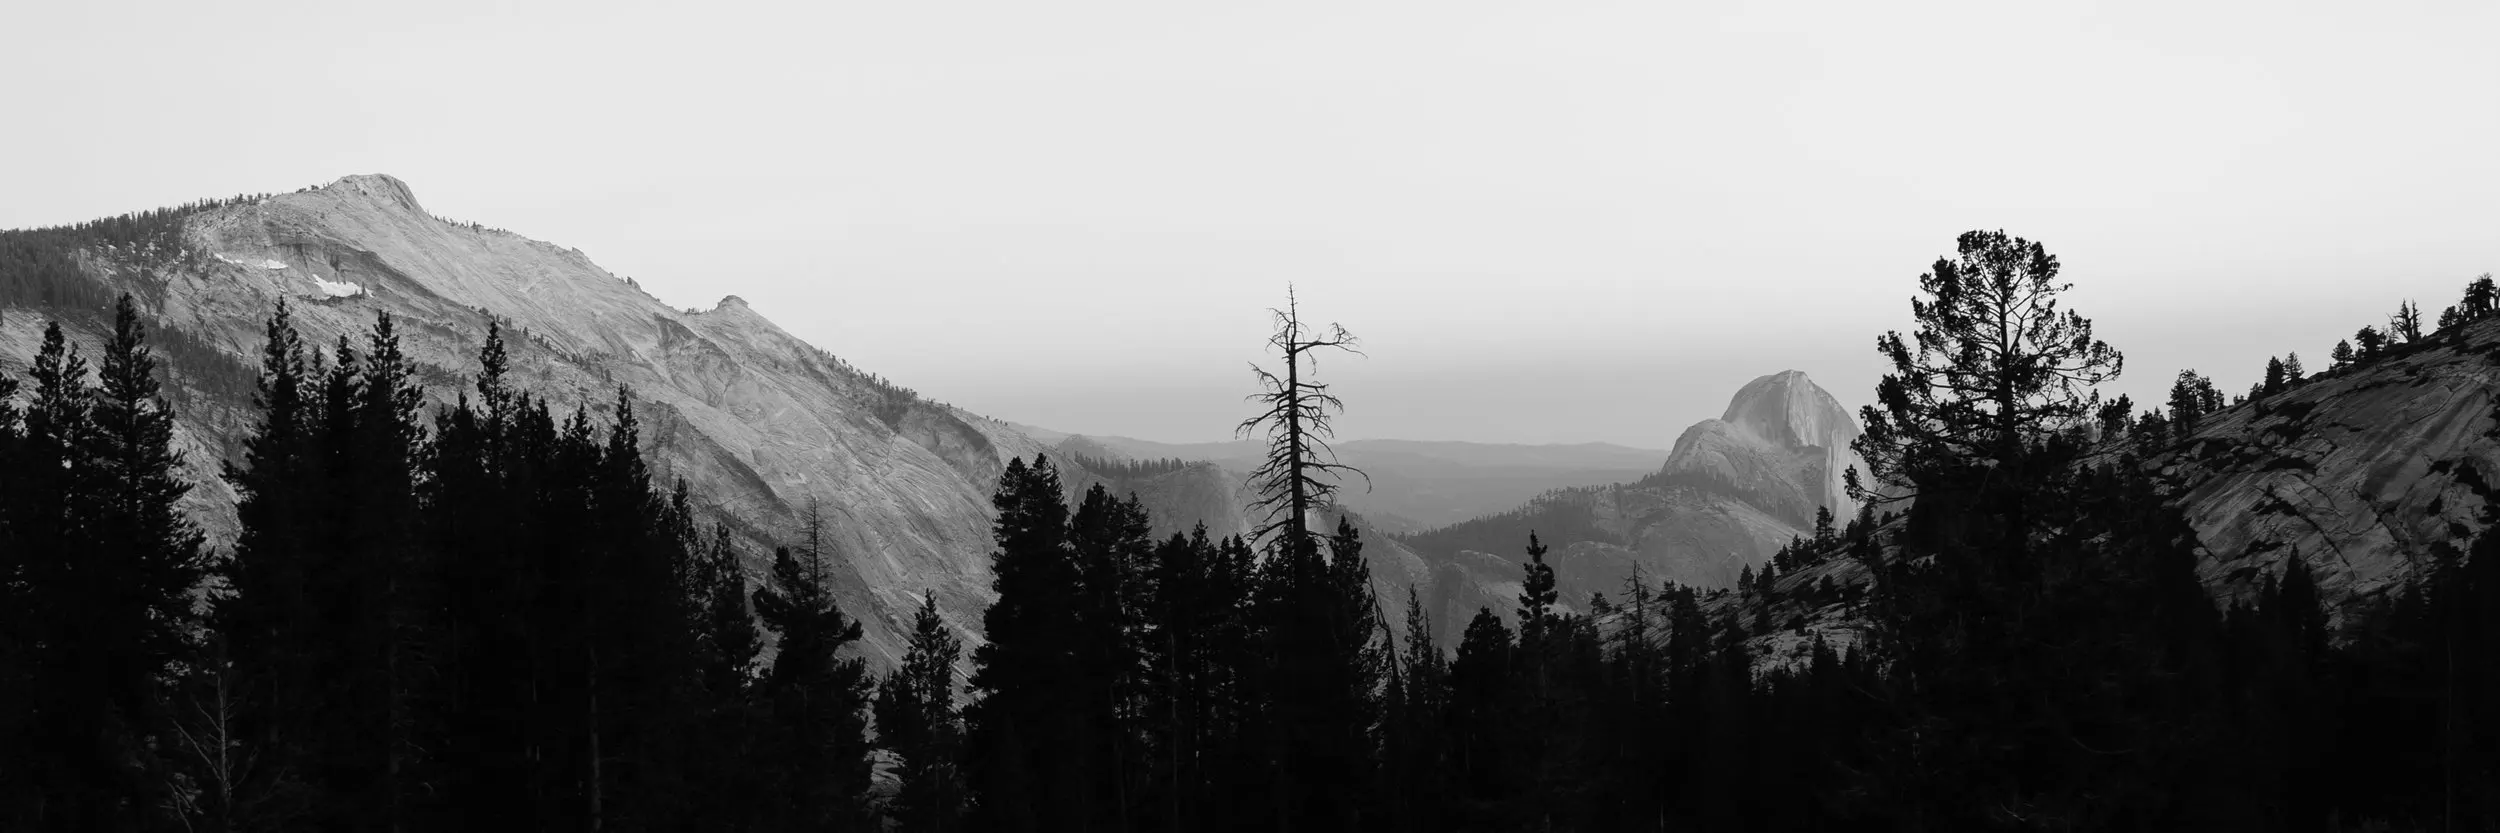 Black and white wide shot at sunset including Half Dome in the distance with dark trees in the foreground.